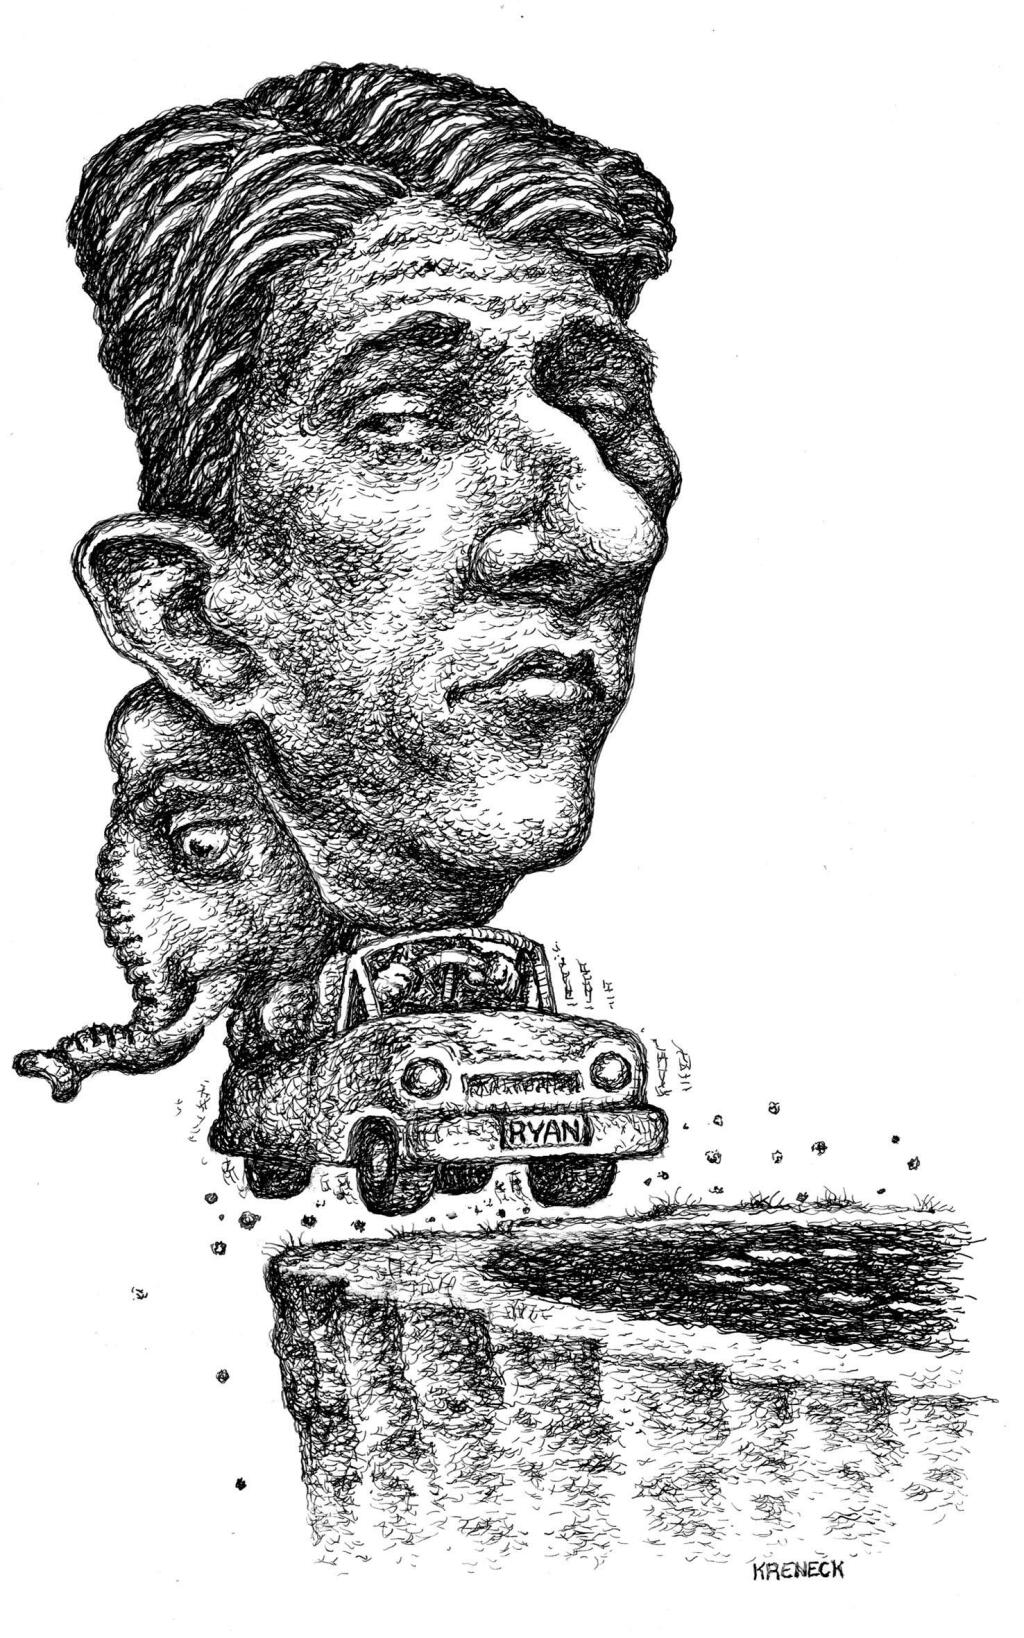 This artwork by Kevin Kreneck relates GOP vice presidential candidate Paul Ryan.